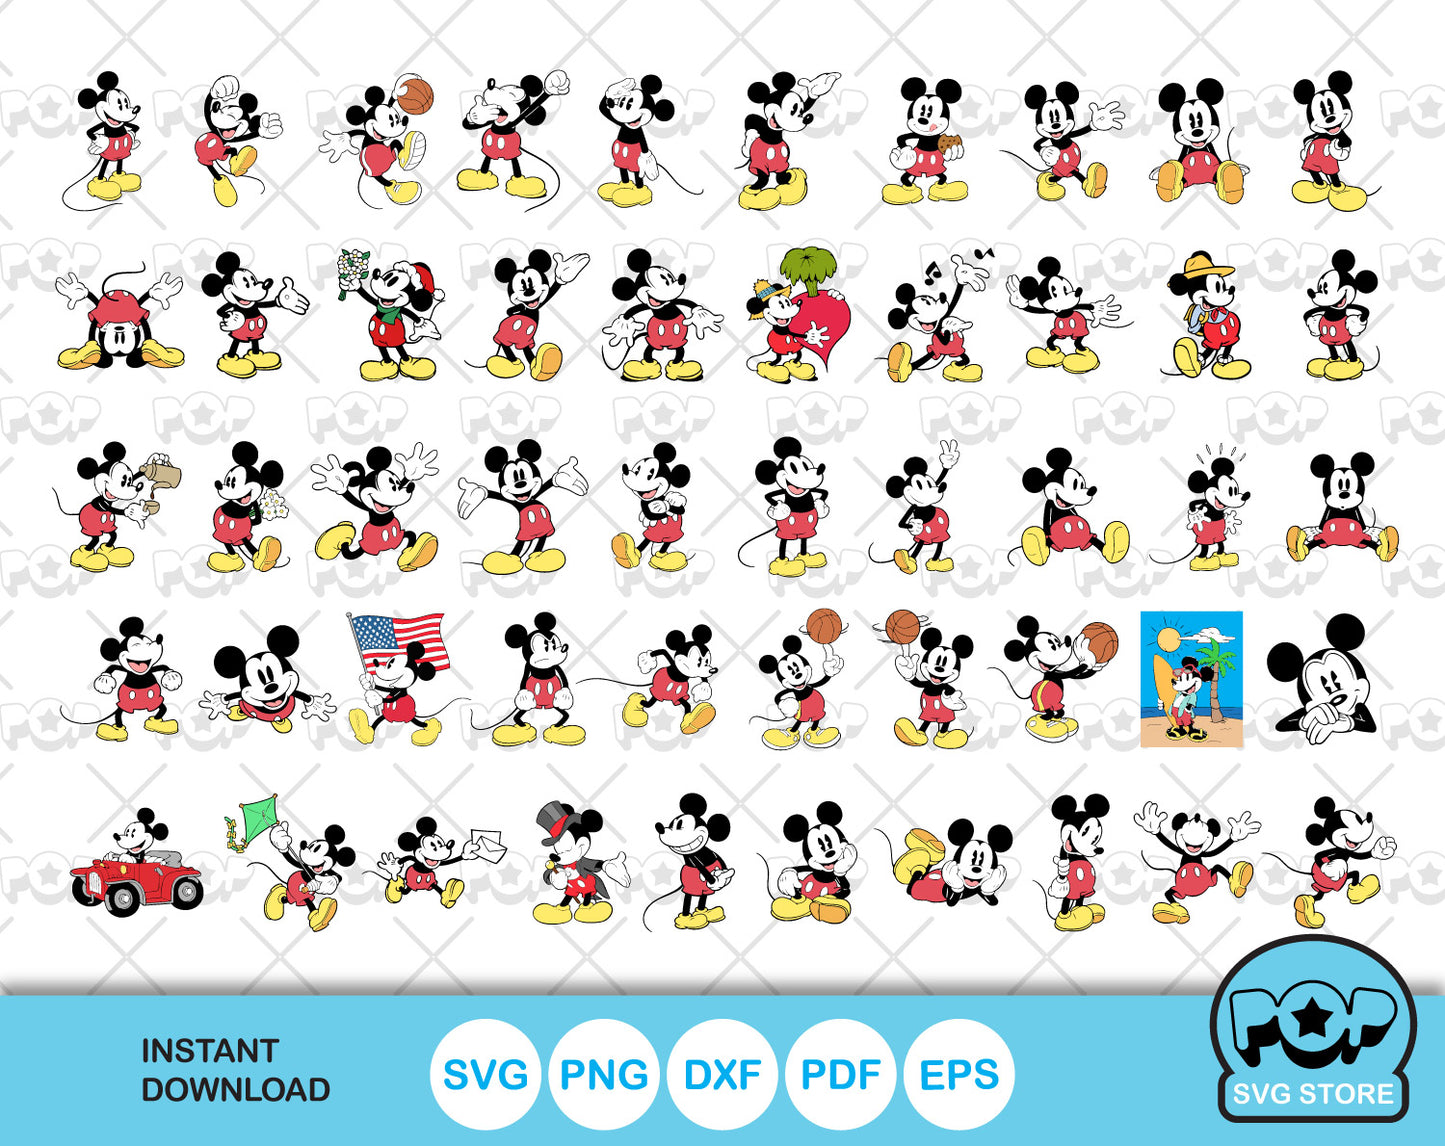 Classic Mickey Mouse clipart bundle, Mickey svg cut files for Cricut / Silhouette, Mickey Mouse png, dxf